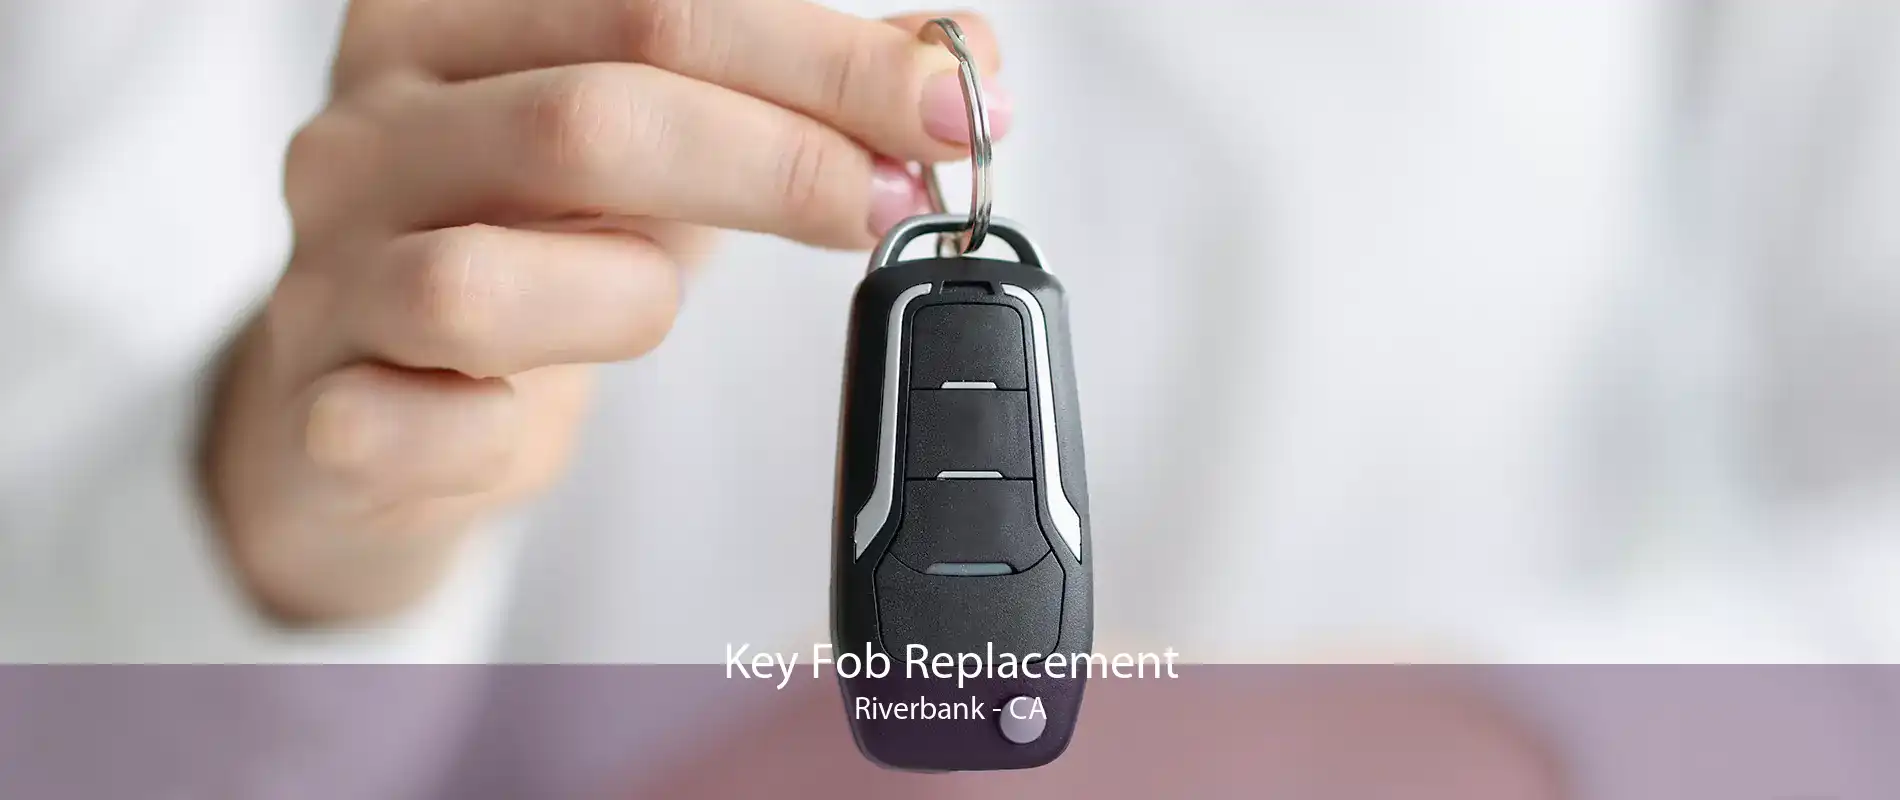 Key Fob Replacement Riverbank - CA